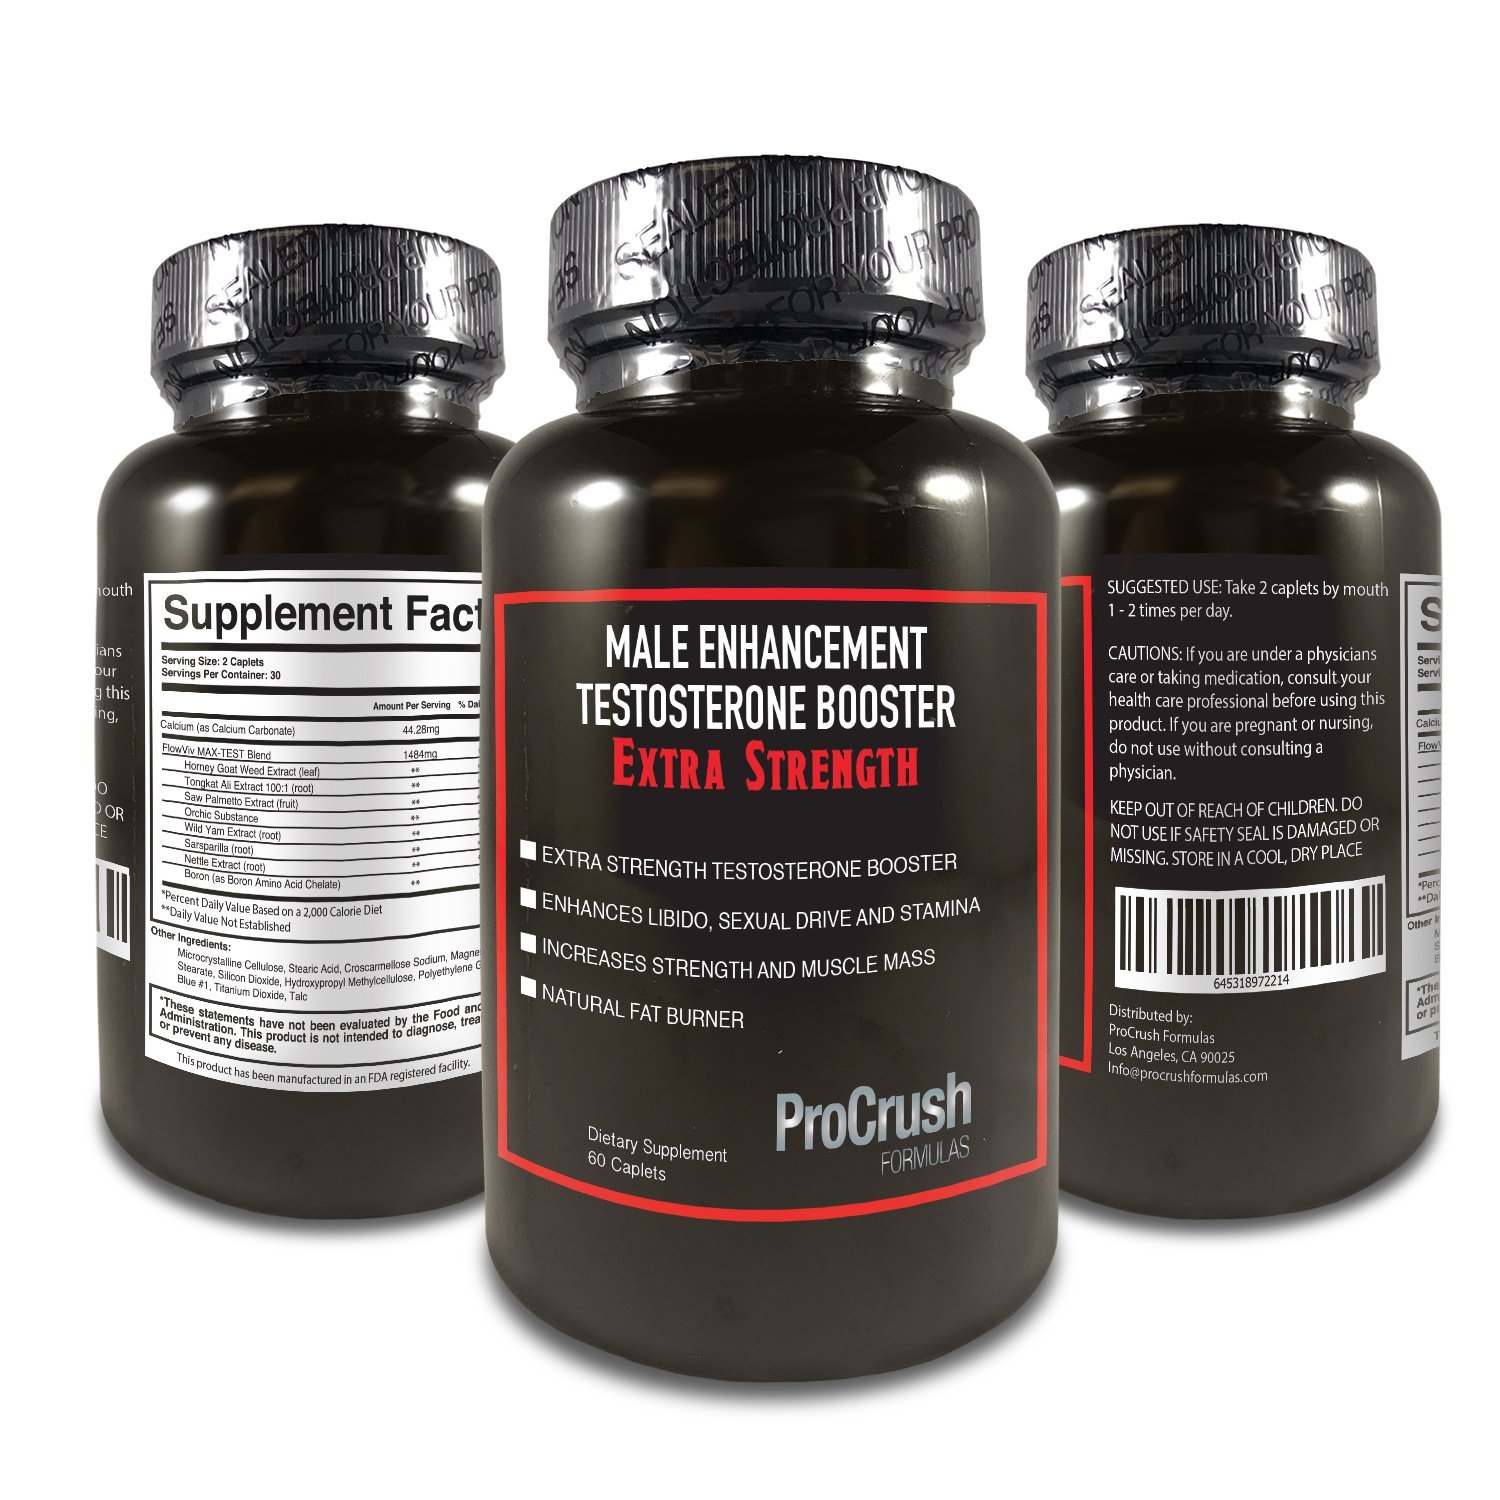 Testosterone Booster And Male Enhancement Supplement Boosts Natural